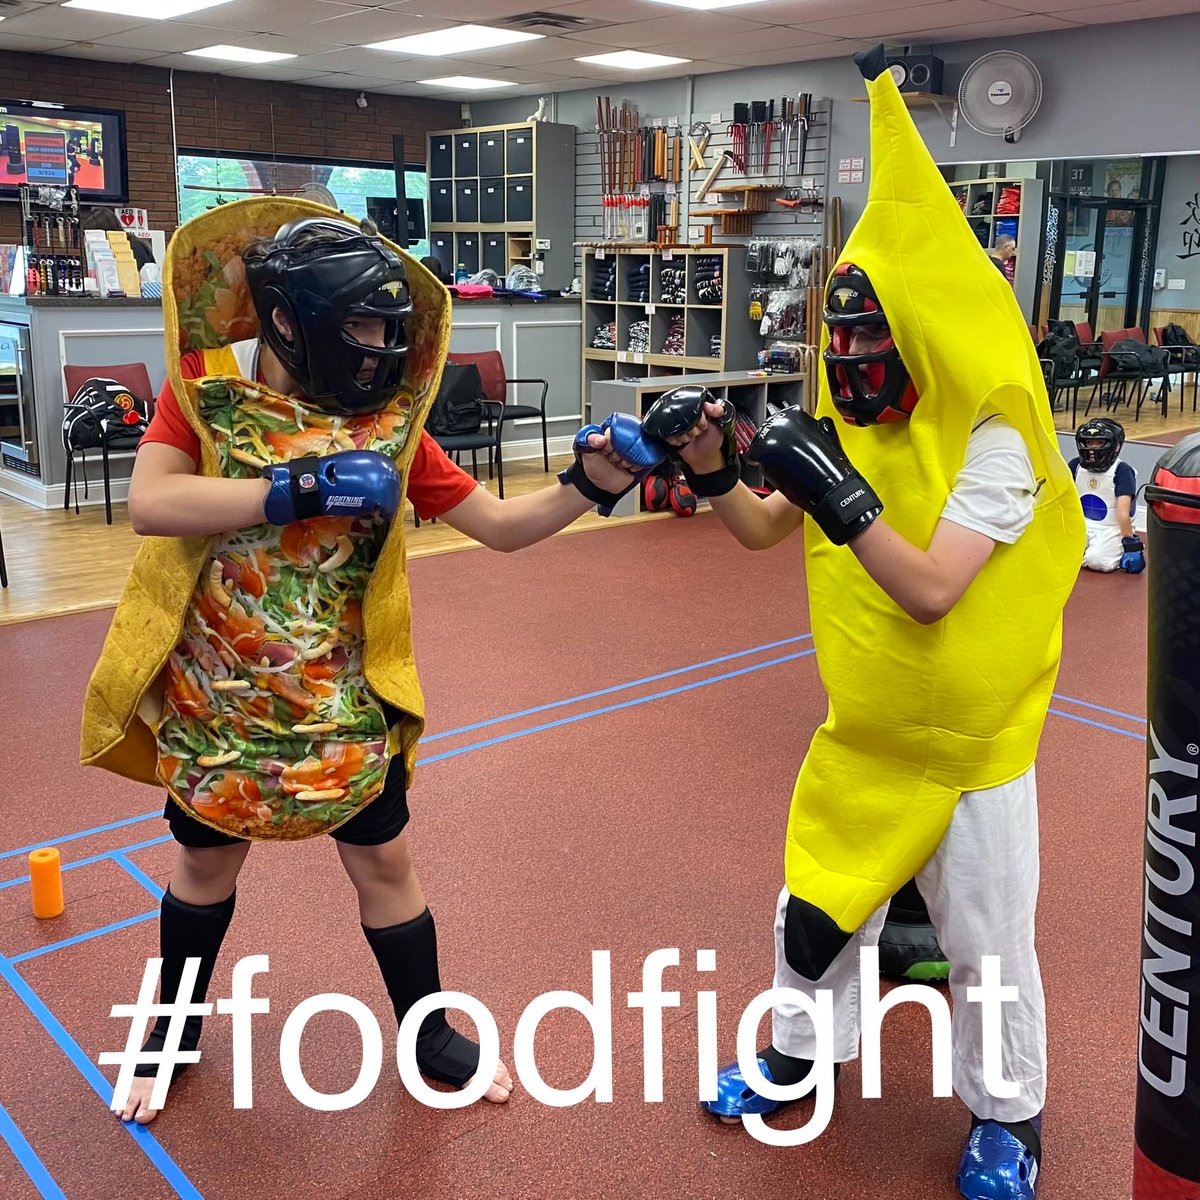 Friendly dojo competitions – pushing each other to new heights! 🏆🤼‍♂️ #DojoCompetition #FriendlyRivalry #ChallengeYourself #FoodFight